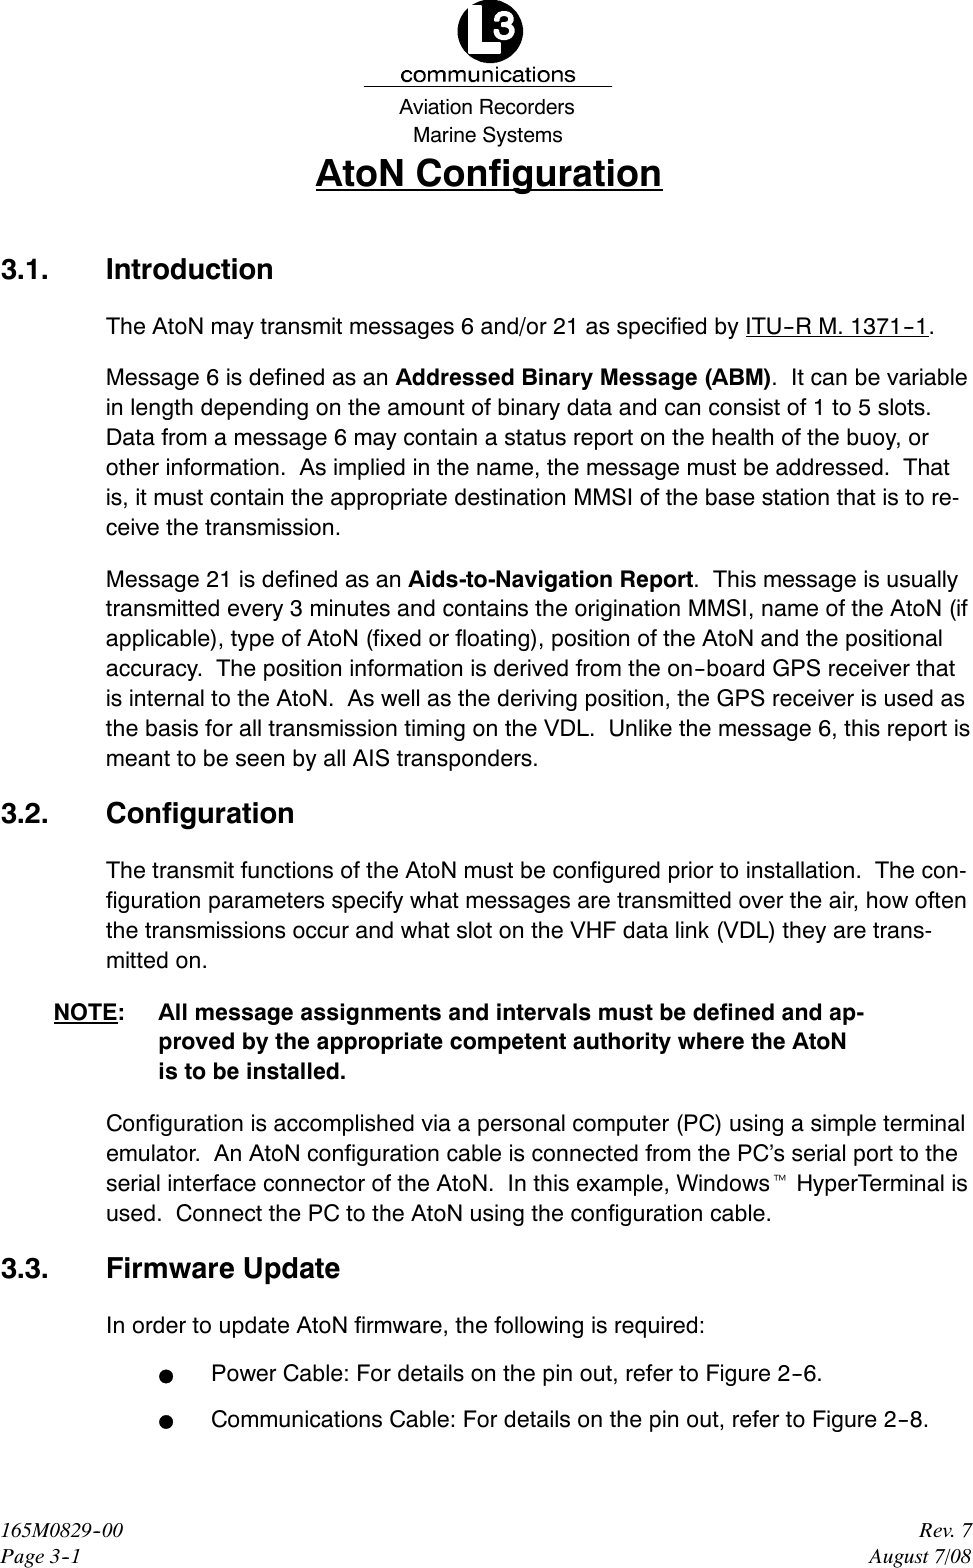 Marine SystemsAviation RecordersRev. 7August 7/08165M0829--00Page 3--1AtoN Configuration3.1. IntroductionThe AtoN may transmit messages 6 and/or 21 as specified by ITU--R M. 1371--1.Message 6 is defined as an Addressed Binary Message (ABM). It can be variablein length depending on the amount of binary data and can consist of 1 to 5 slots.Data from a message 6 may contain a status report on the health of the buoy, orother information. As implied in the name, the message must be addressed. Thatis, it must contain the appropriate destination MMSI of the base station that is to re-ceive the transmission.Message 21 is defined as an Aids-to-Navigation Report. This message is usuallytransmitted every 3 minutes and contains the origination MMSI, name of the AtoN (ifapplicable), type of AtoN (fixed or floating), position of the AtoN and the positionalaccuracy. The position information is derived from the on--board GPS receiver thatis internal to the AtoN. As well as the deriving position, the GPS receiver is used asthe basis for all transmission timing on the VDL. Unlike the message 6, this report ismeant to be seen by all AIS transponders.3.2. ConfigurationThe transmit functions of the AtoN must be configured prior to installation. The con-figuration parameters specify what messages are transmitted over the air, how oftenthe transmissions occur and what slot on the VHF data link (VDL) they are trans-mitted on.NOTE: All message assignments and intervals must be defined and ap-proved by the appropriate competent authority where the AtoNis to be installed.Configuration is accomplished via a personal computer (PC) using a simple terminalemulator. An AtoN configuration cable is connected from the PC’s serial port to theserial interface connector of the AtoN. In this example, WindowstHyperTerminal isused. Connect the PC to the AtoN using the configuration cable.3.3. Firmware UpdateIn order to update AtoN firmware, the following is required:FPower Cable: For details on the pin out, refer to Figure 2--6.FCommunications Cable: For details on the pin out, refer to Figure 2--8.